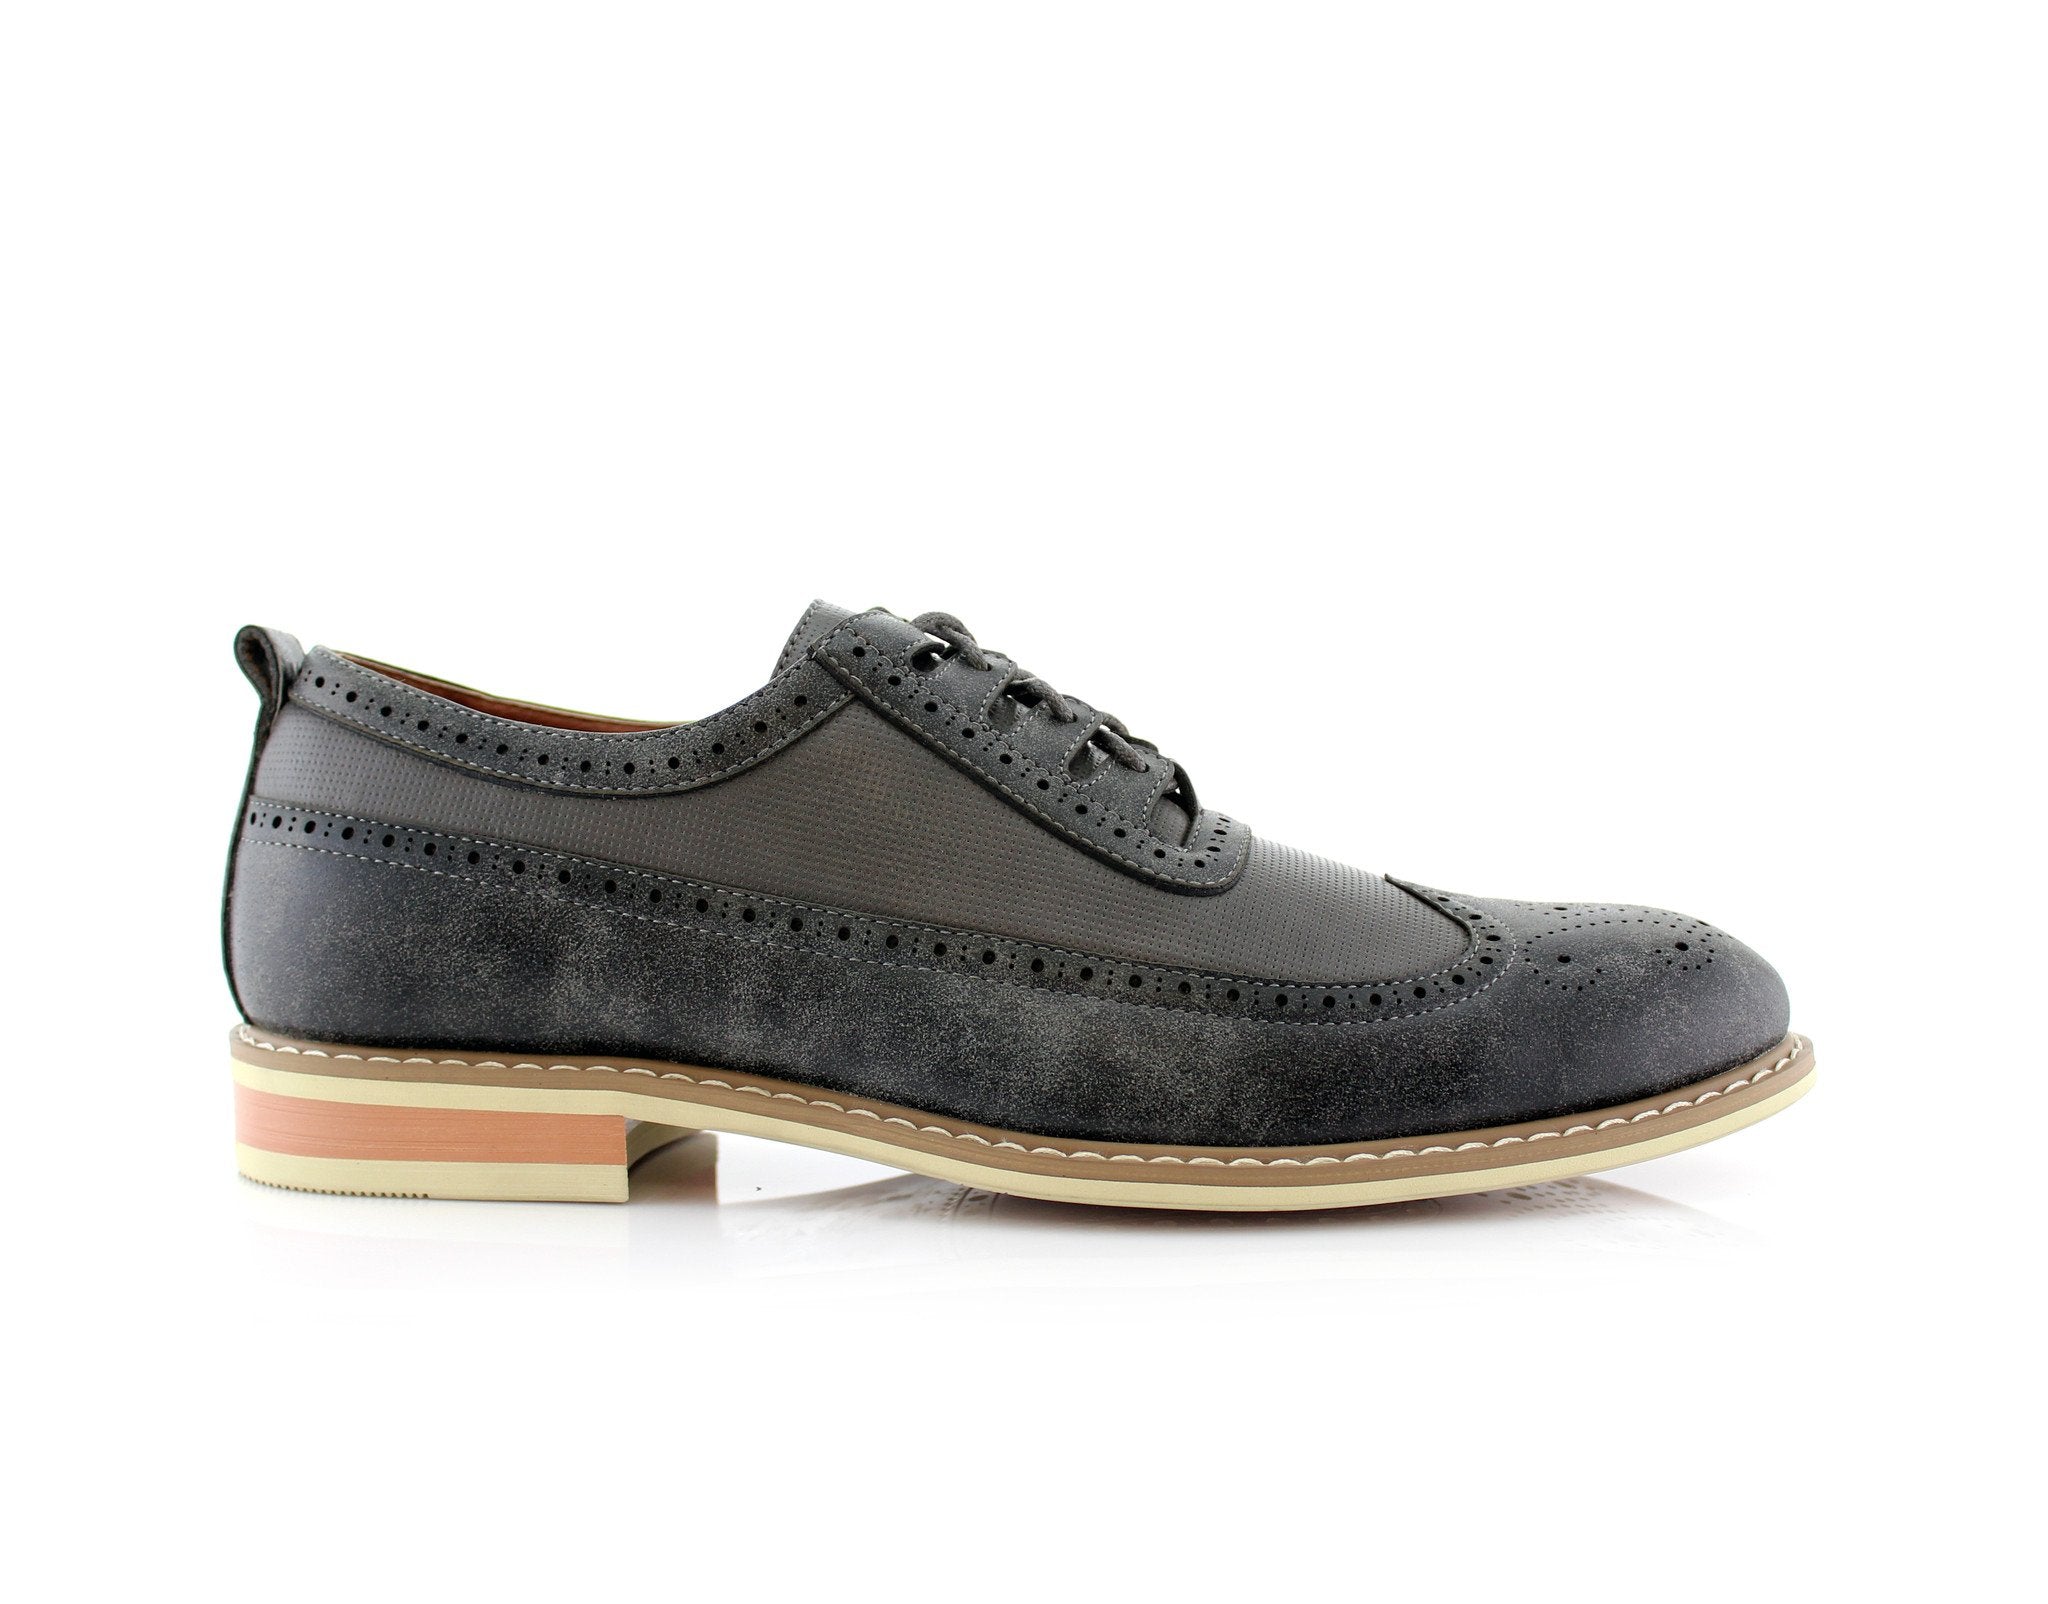 Brogue Wingtip Oxfords | Josh by Ferro Aldo | Conal Footwear | Outer Side Angle View